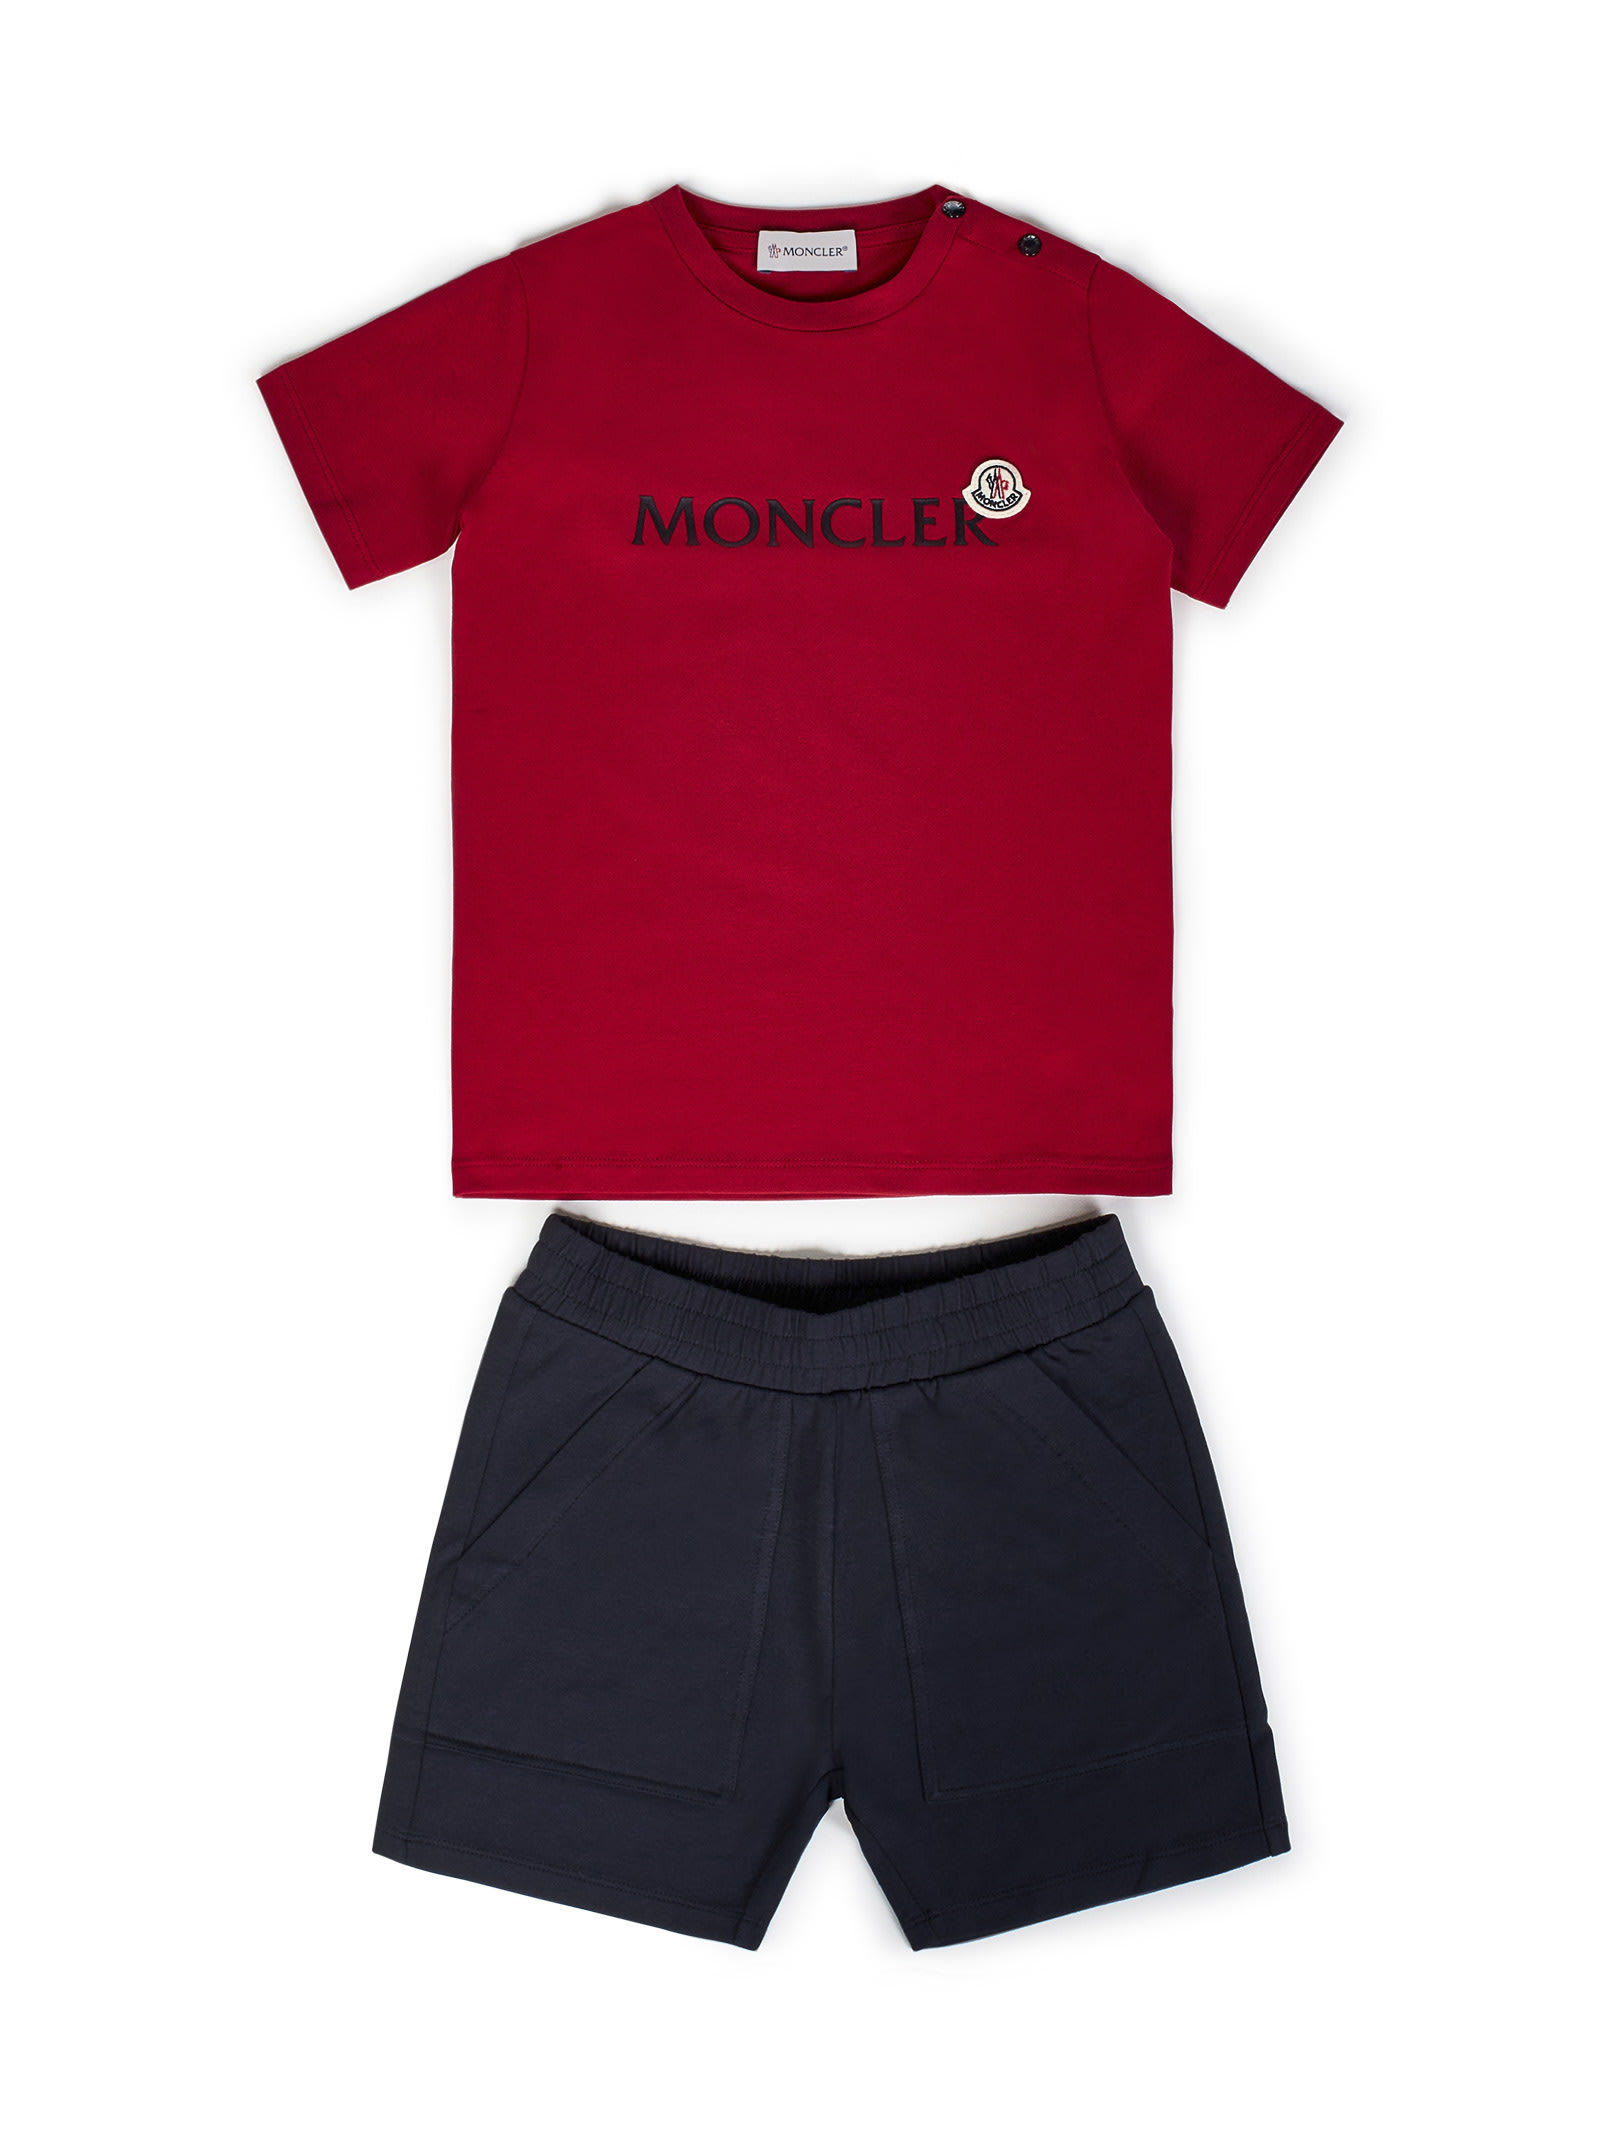 Moncler Babies' Set In Red